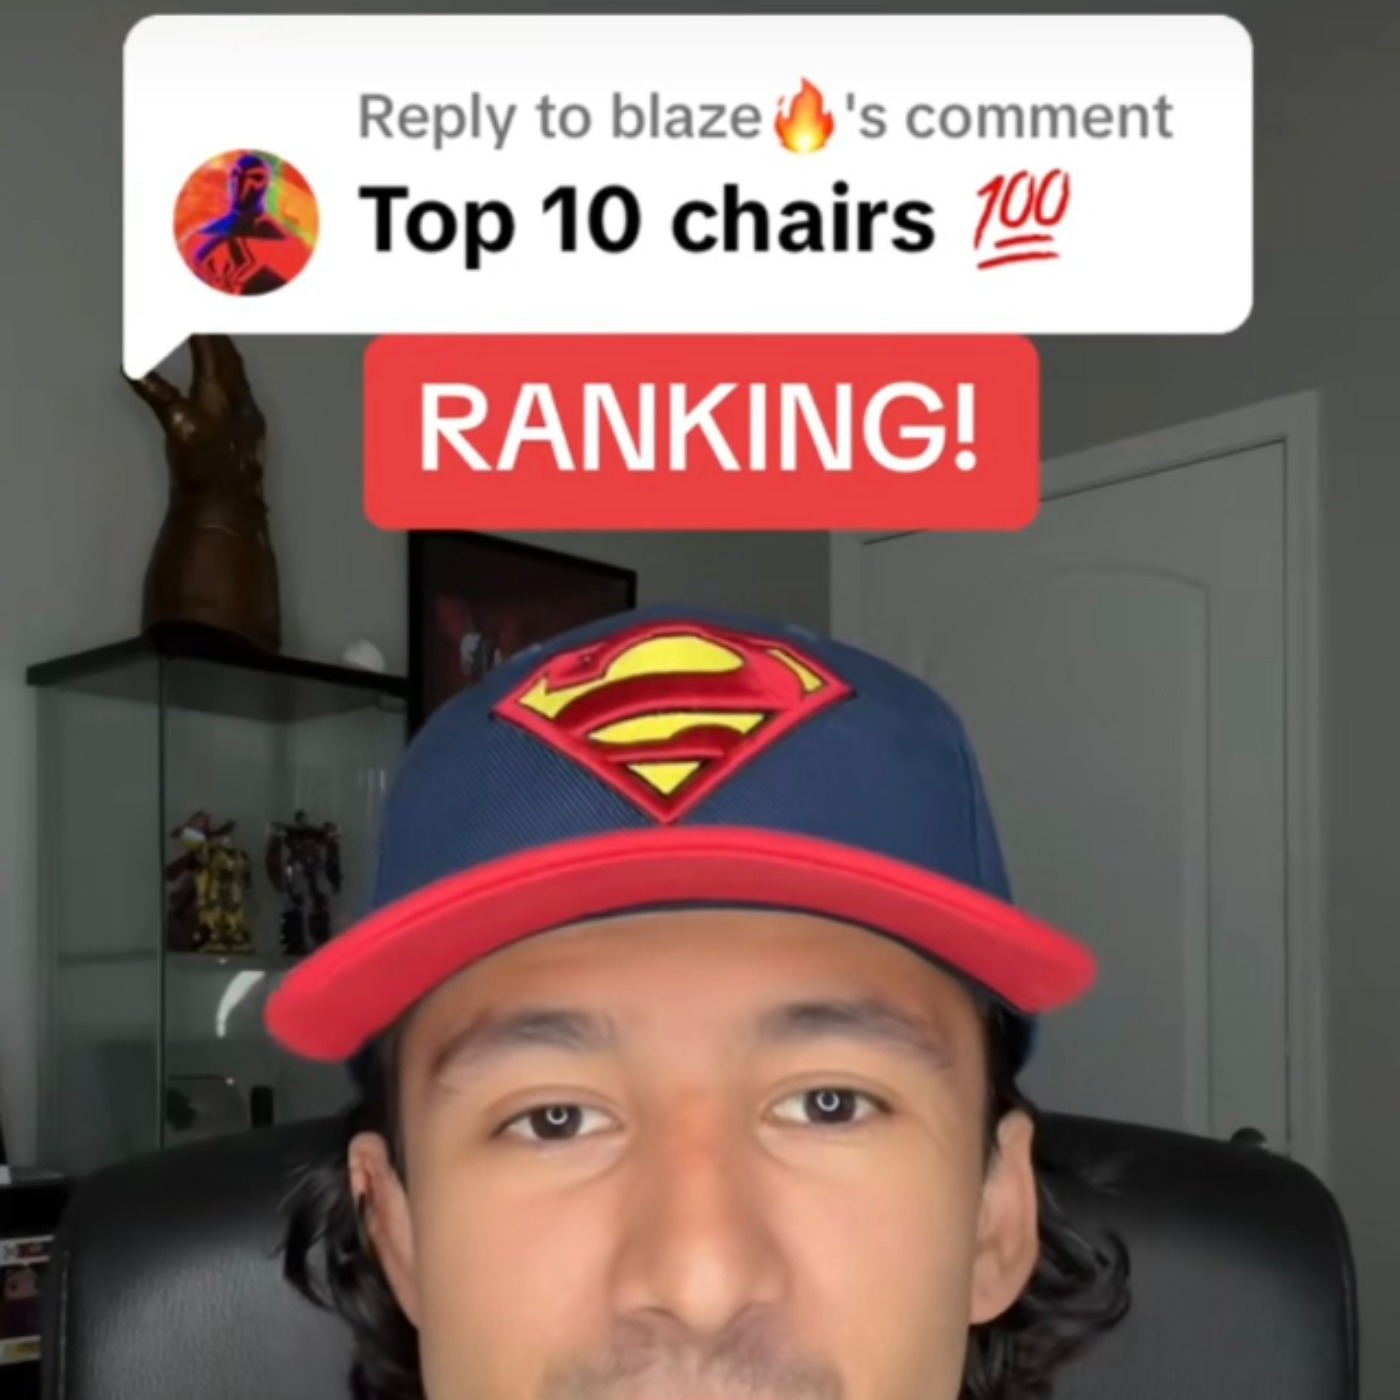 Episode 623: Top 10 Chairs